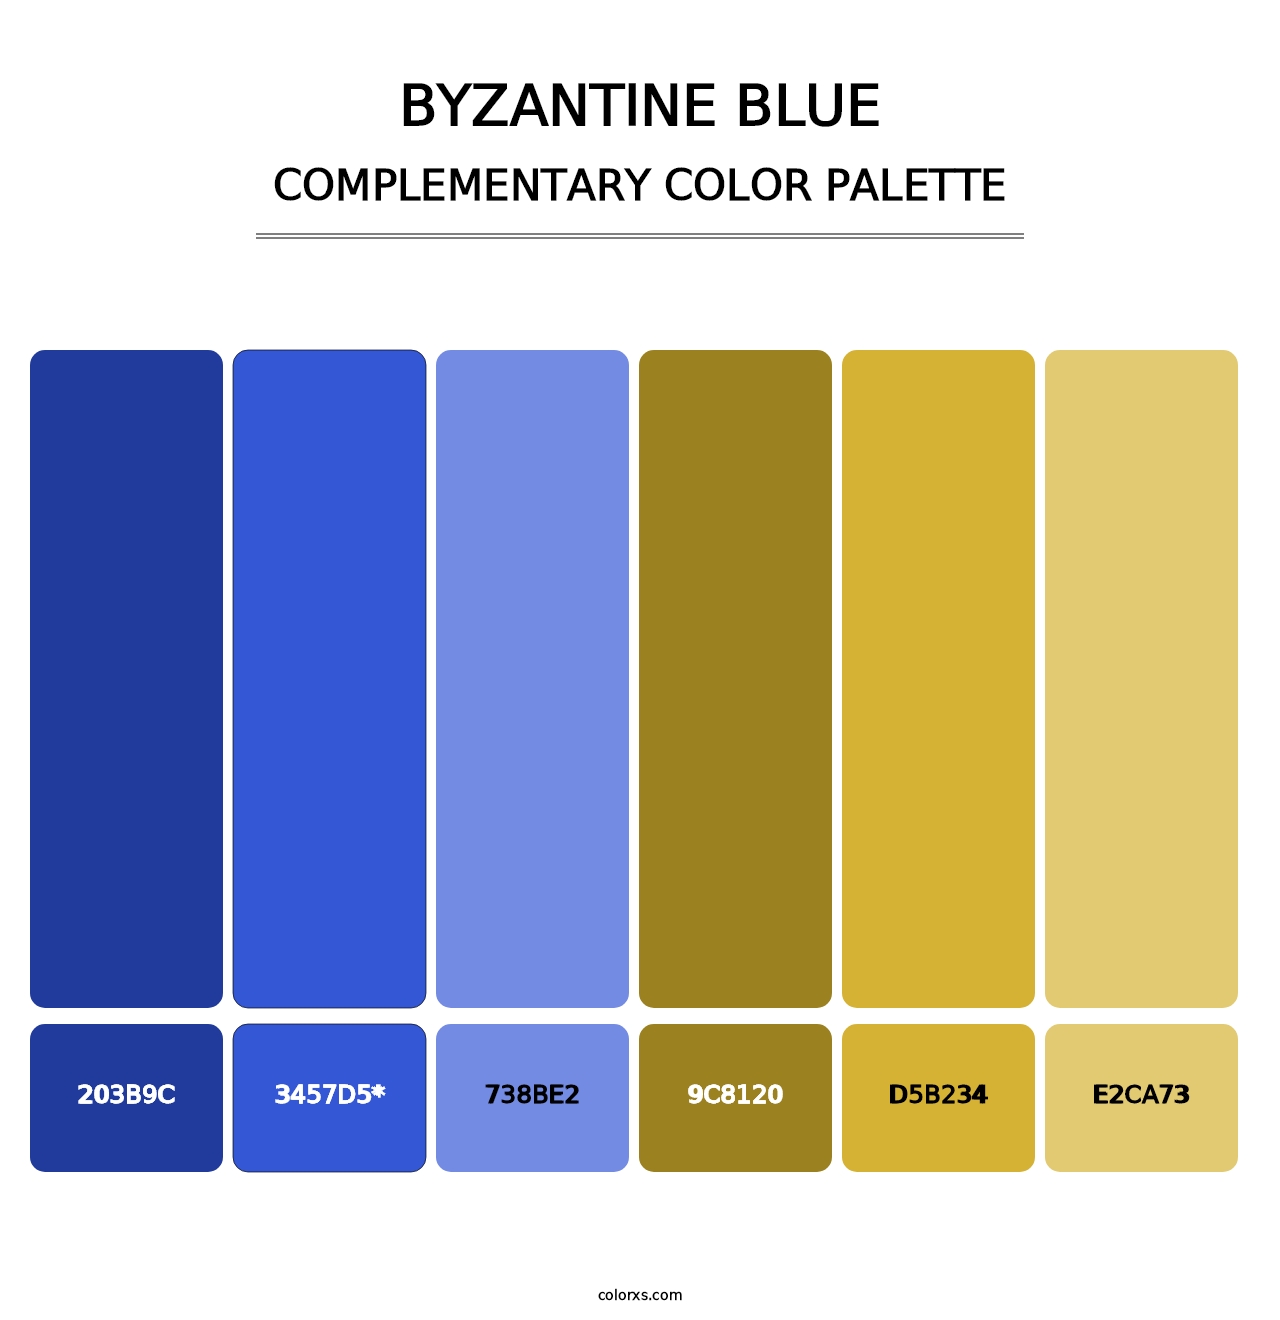 Byzantine Blue - Complementary Color Palette